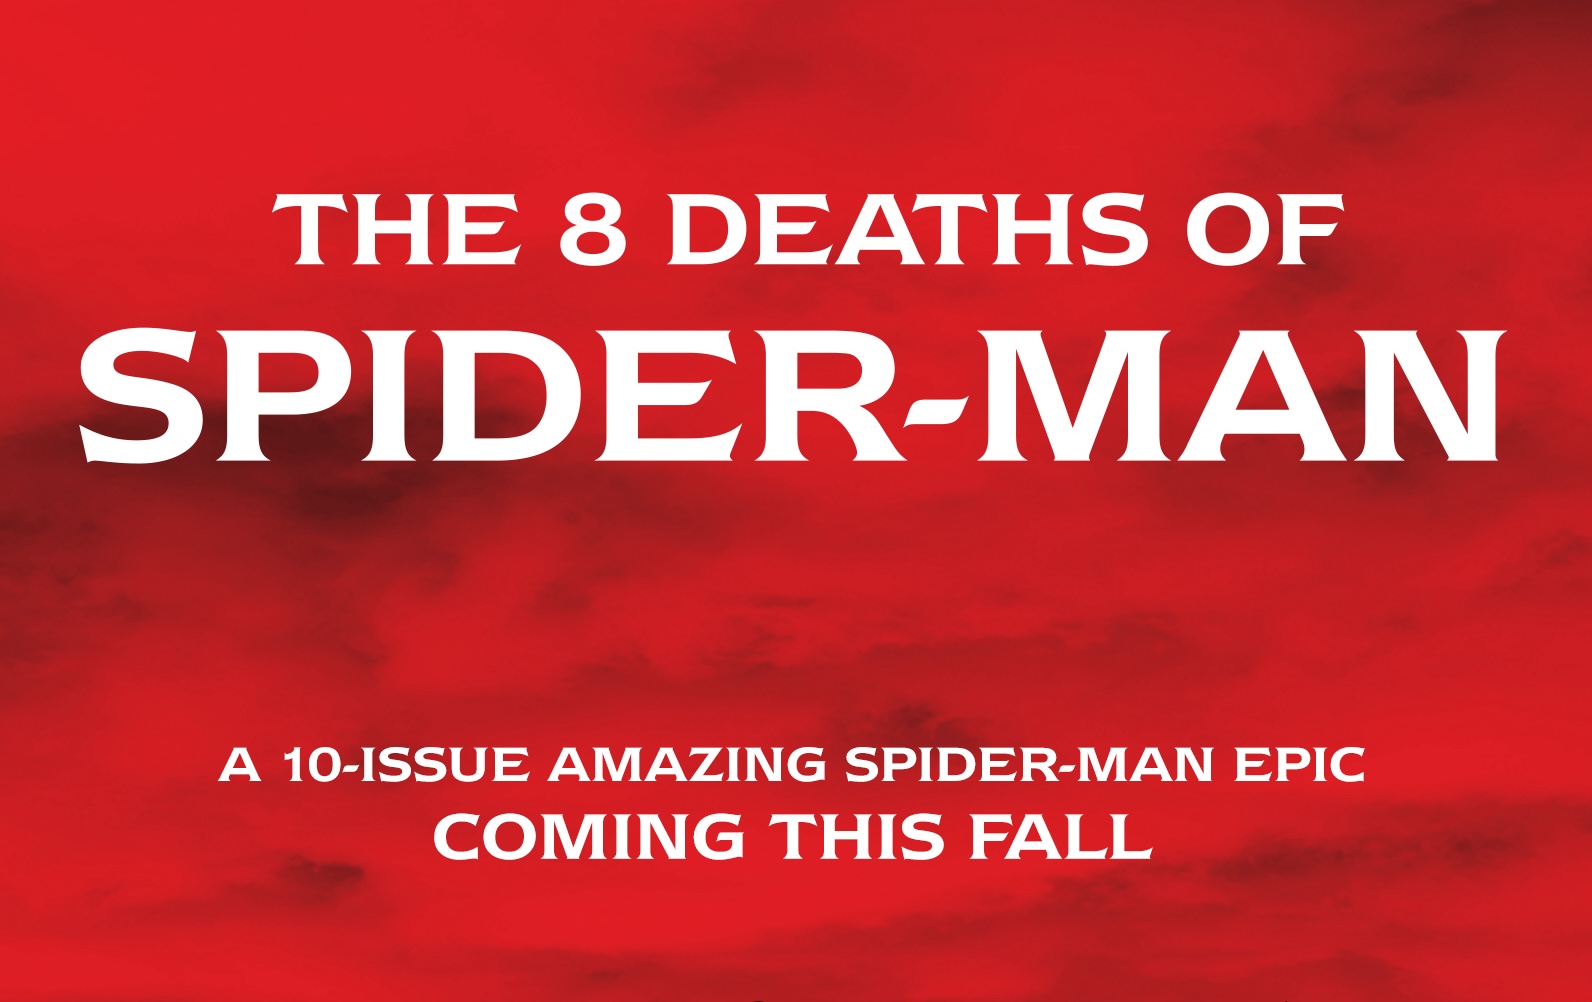 Marvel teases 'The 8 Deaths of Spider-Man' for this fall